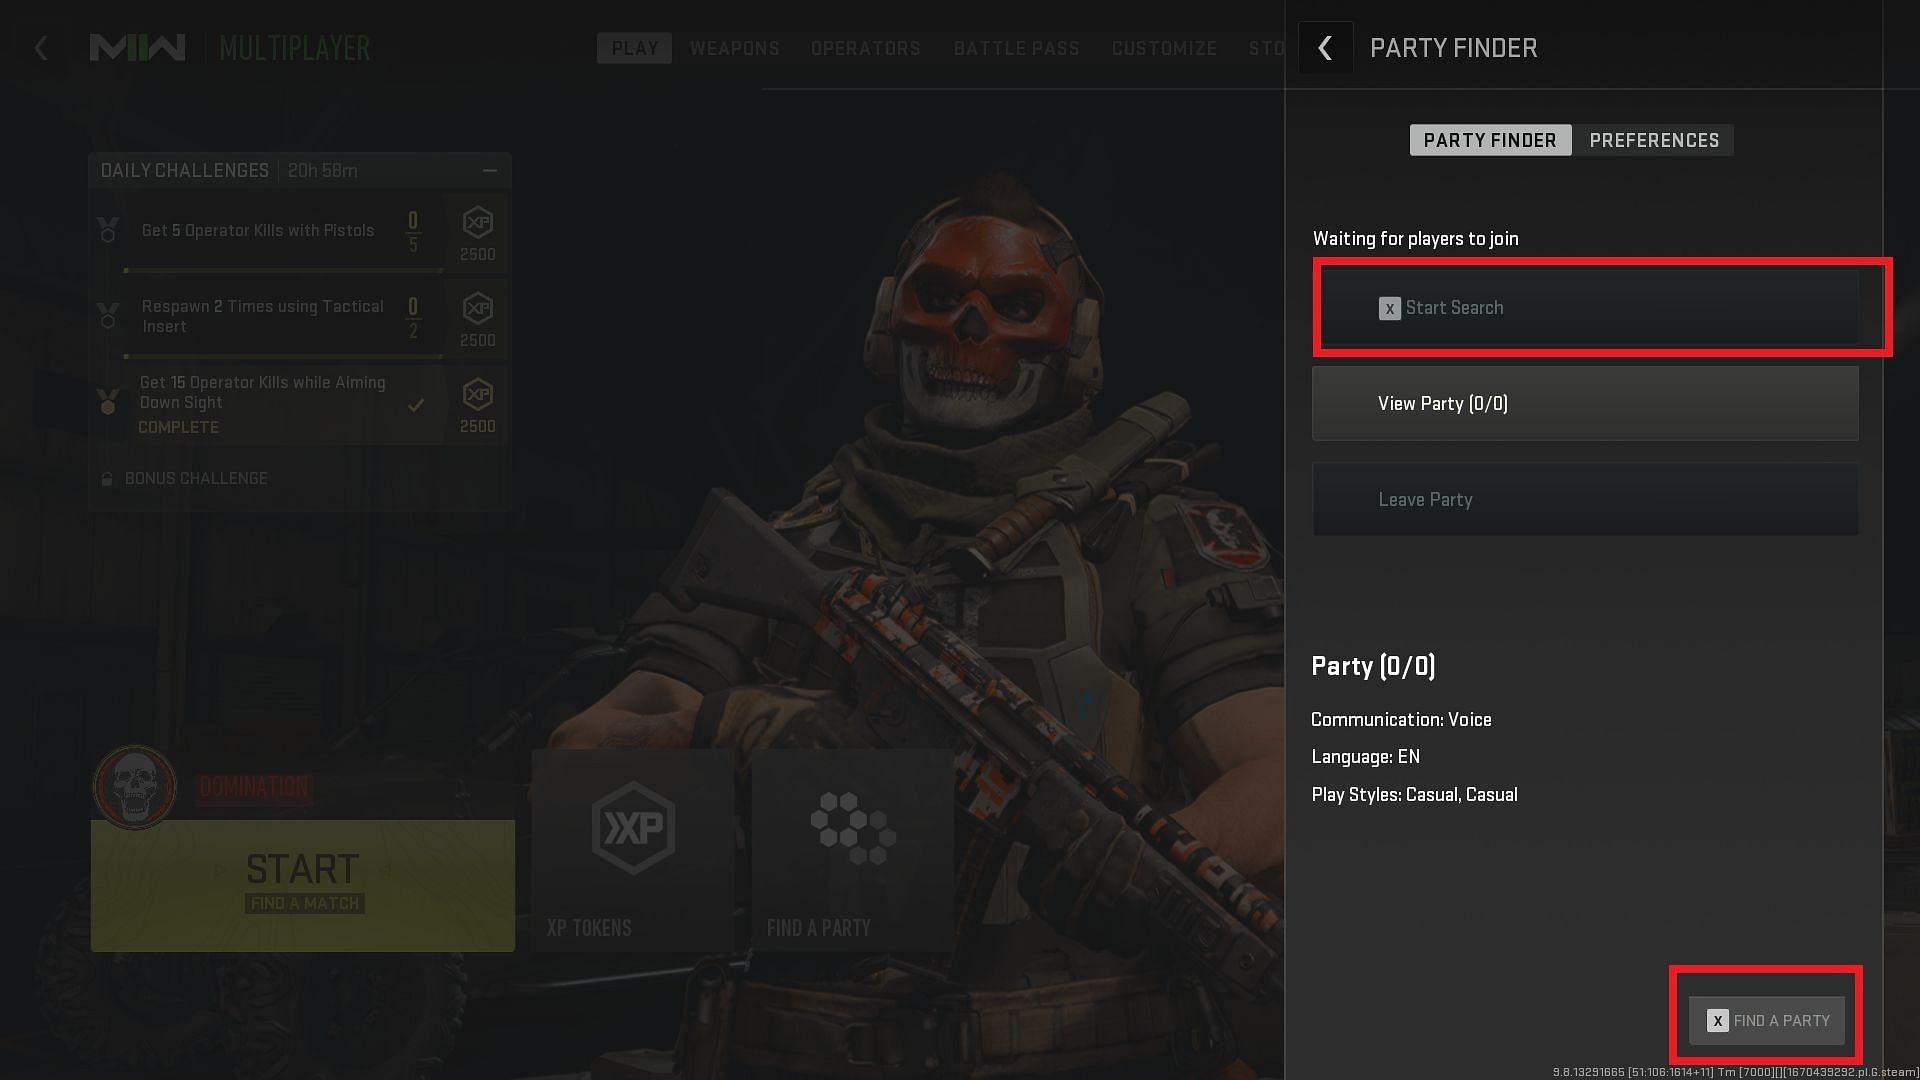 Start Search option is greyed out in Party Finder (Image via Activision)